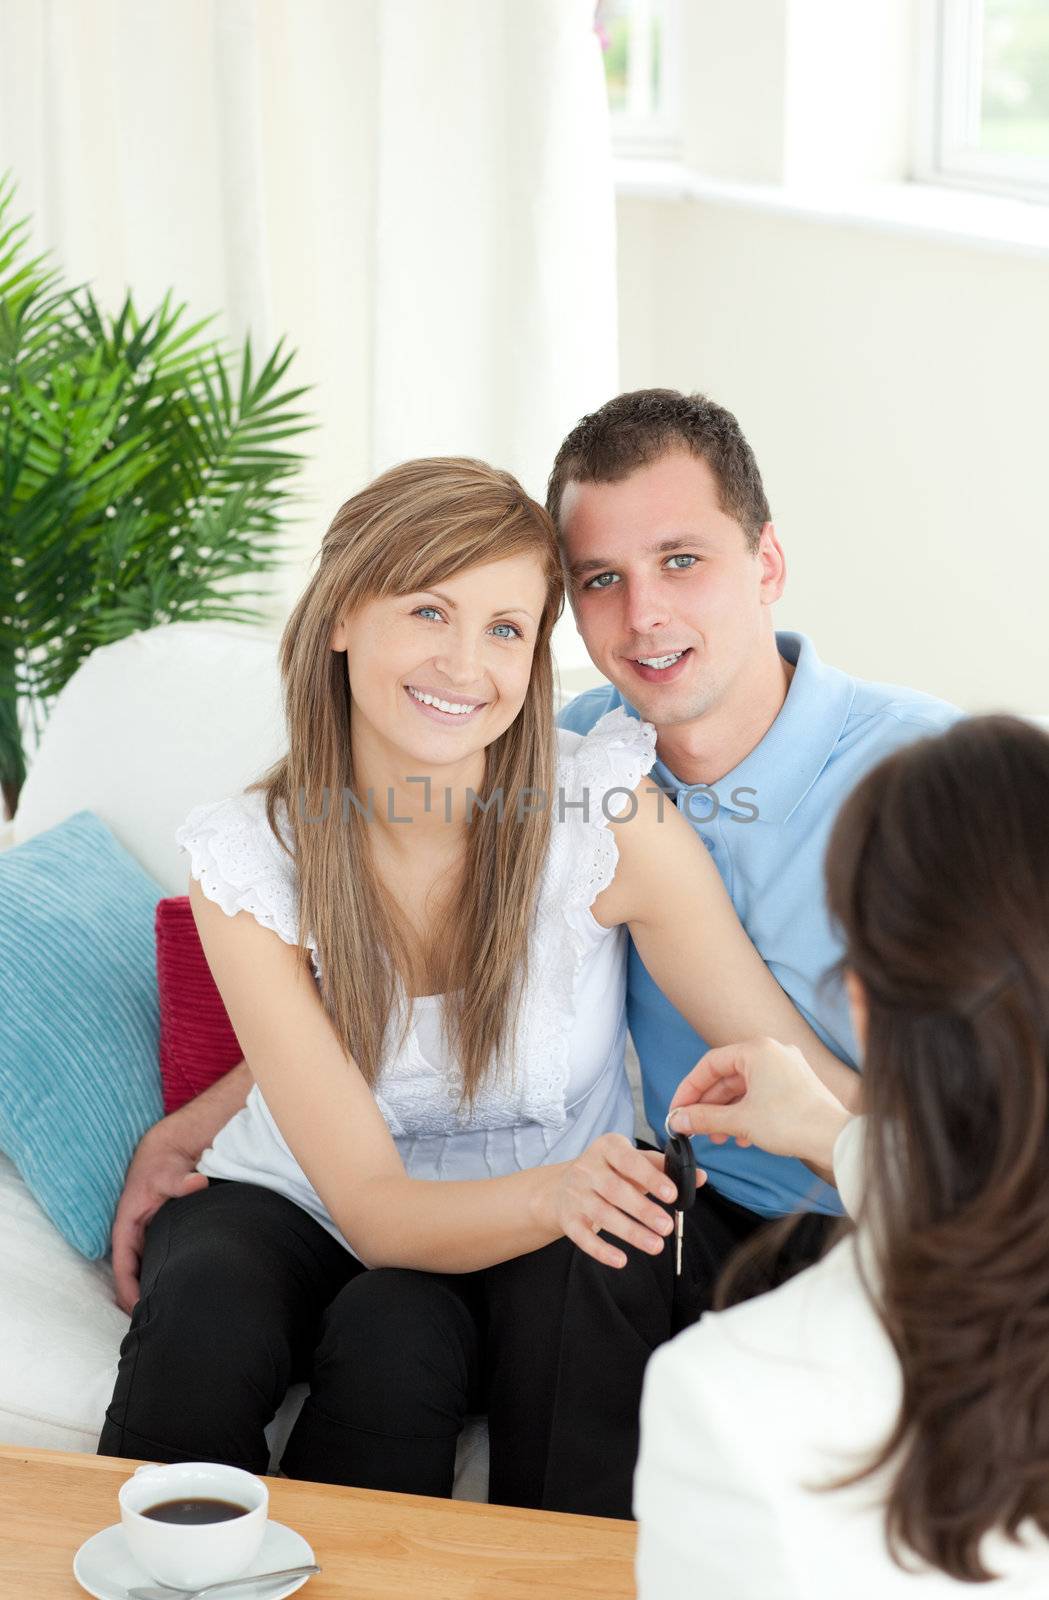 Jolly young couple receiving their new car's key sitting on a sofa